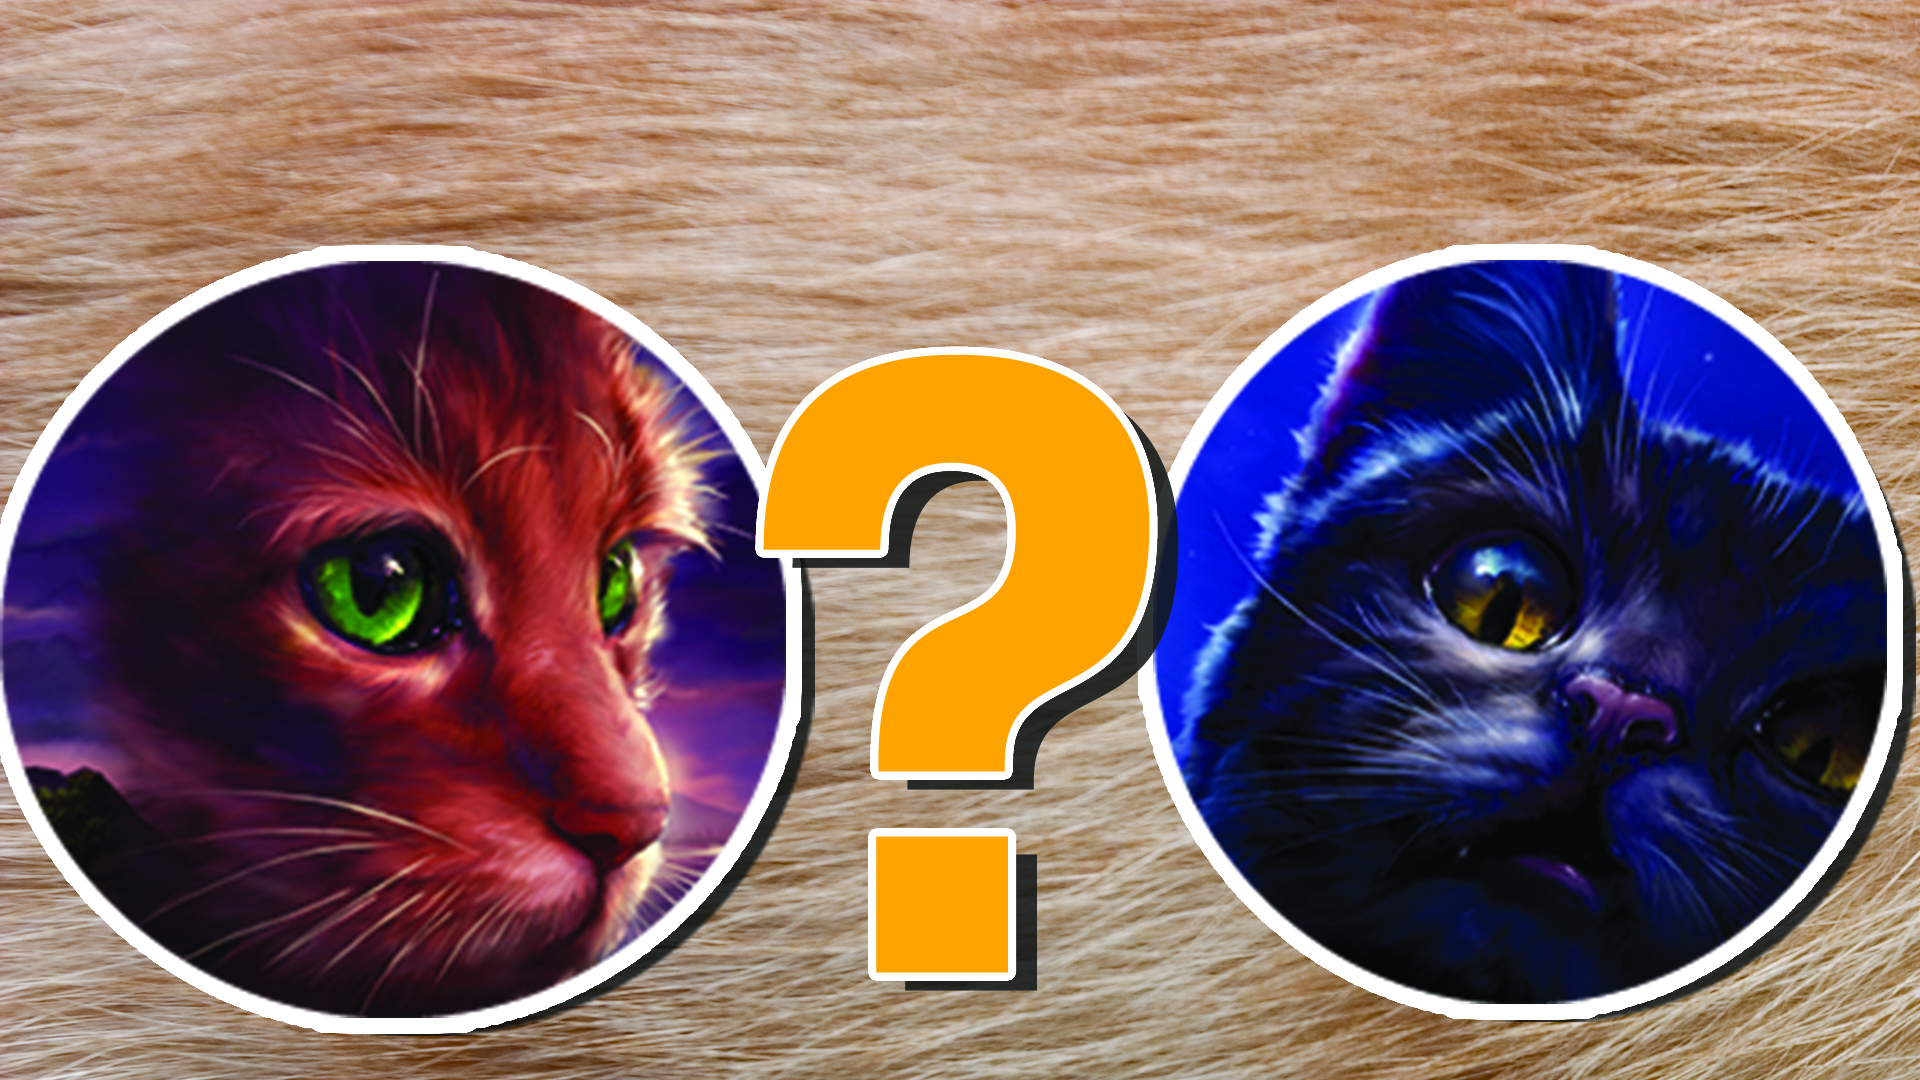 Guess the warrior cat by emojis! (EASY) - Test